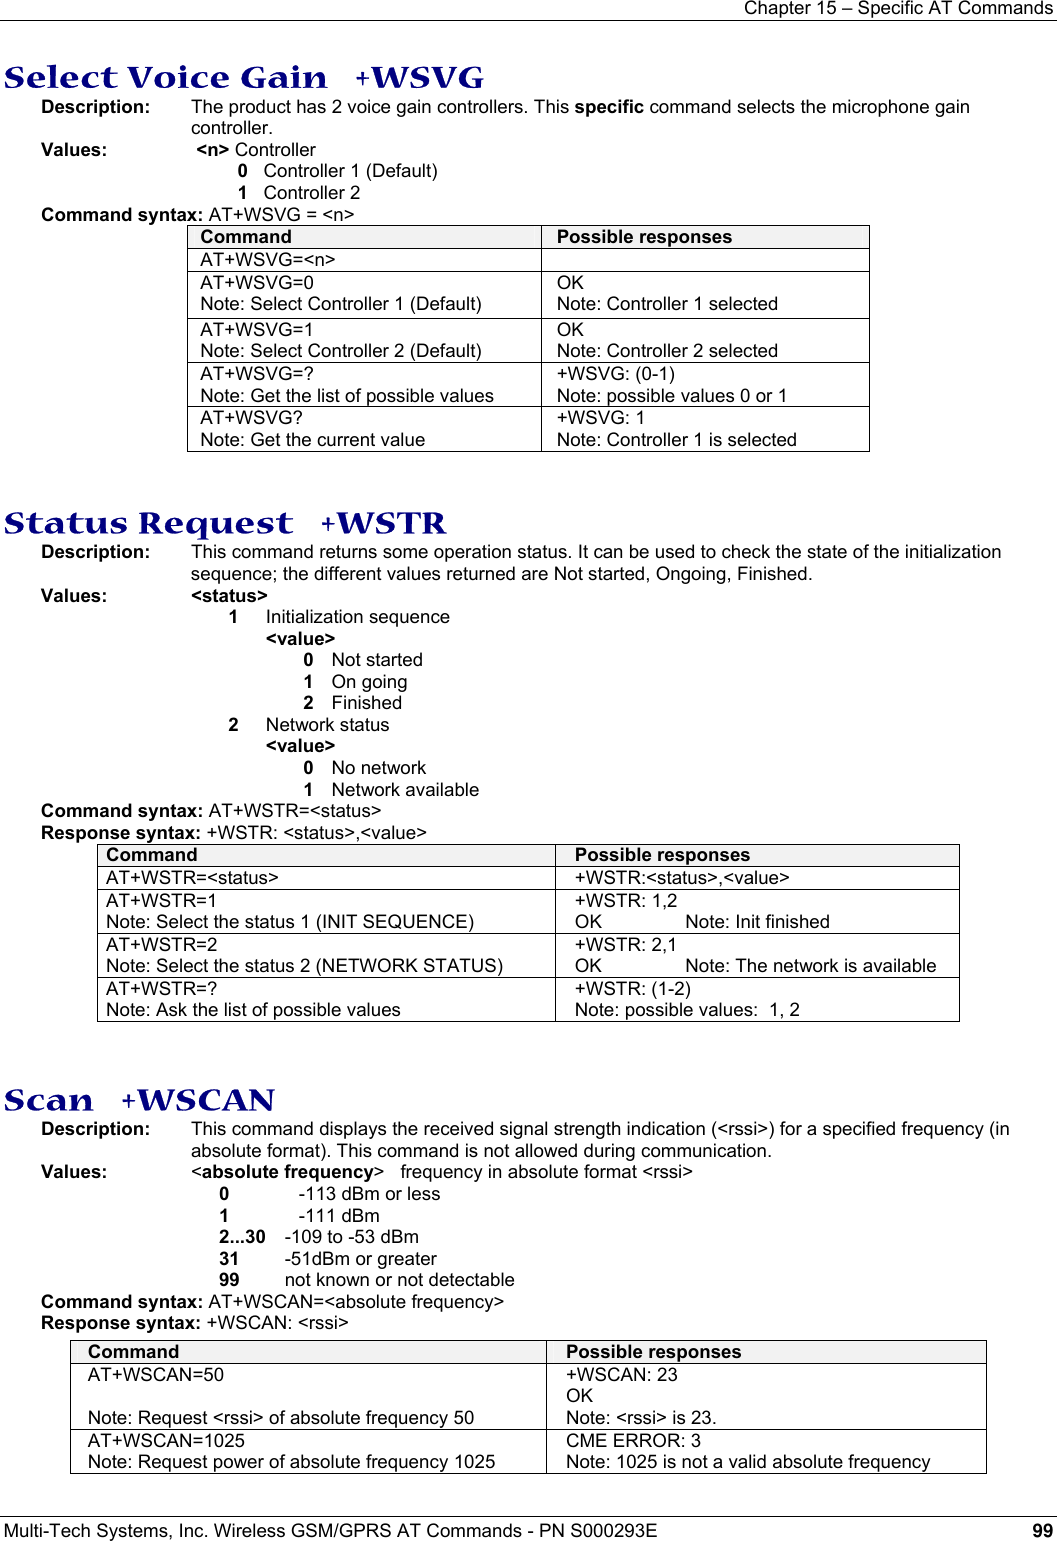 Chapter 15 – Specific AT Commands  Multi-Tech Systems, Inc. Wireless GSM/GPRS AT Commands - PN S000293E 99  Select Voice Gain   +WSVG Description:  The product has 2 voice gain controllers. This specific command selects the microphone gain controller. Values:  &lt;n&gt; Controller   0   Controller 1 (Default) 1   Controller 2 Command syntax: AT+WSVG = &lt;n&gt; Command  Possible responses AT+WSVG=&lt;n&gt;  AT+WSVG=0 Note: Select Controller 1 (Default) OK Note: Controller 1 selected AT+WSVG=1 Note: Select Controller 2 (Default) OK Note: Controller 2 selected AT+WSVG=? Note: Get the list of possible values +WSVG: (0-1) Note: possible values 0 or 1 AT+WSVG? Note: Get the current value +WSVG: 1 Note: Controller 1 is selected   Status Request   +WSTR Description:  This command returns some operation status. It can be used to check the state of the initialization sequence; the different values returned are Not started, Ongoing, Finished. Values: &lt;status&gt;  1  Initialization sequence &lt;value&gt;  0   Not started 1 On going 2   Finished 2  Network status &lt;value&gt;  0  No network 1 Network available Command syntax: AT+WSTR=&lt;status&gt; Response syntax: +WSTR: &lt;status&gt;,&lt;value&gt; Command  Possible responses AT+WSTR=&lt;status&gt; +WSTR:&lt;status&gt;,&lt;value&gt; AT+WSTR=1 Note: Select the status 1 (INIT SEQUENCE) +WSTR: 1,2 OK                Note: Init finished AT+WSTR=2 Note: Select the status 2 (NETWORK STATUS) +WSTR: 2,1 OK                Note: The network is available AT+WSTR=? Note: Ask the list of possible values +WSTR: (1-2) Note: possible values:  1, 2   Scan   +WSCAN Description:  This command displays the received signal strength indication (&lt;rssi&gt;) for a specified frequency (in absolute format). This command is not allowed during communication. Values:  &lt;absolute frequency&gt;   frequency in absolute format &lt;rssi&gt;   0    -113 dBm or less 1  -111 dBm 2...30  -109 to -53 dBm 31  -51dBm or greater 99  not known or not detectable Command syntax: AT+WSCAN=&lt;absolute frequency&gt; Response syntax: +WSCAN: &lt;rssi&gt; Command  Possible responses AT+WSCAN=50  Note: Request &lt;rssi&gt; of absolute frequency 50 +WSCAN: 23 OK Note: &lt;rssi&gt; is 23. AT+WSCAN=1025 Note: Request power of absolute frequency 1025 CME ERROR: 3 Note: 1025 is not a valid absolute frequency  